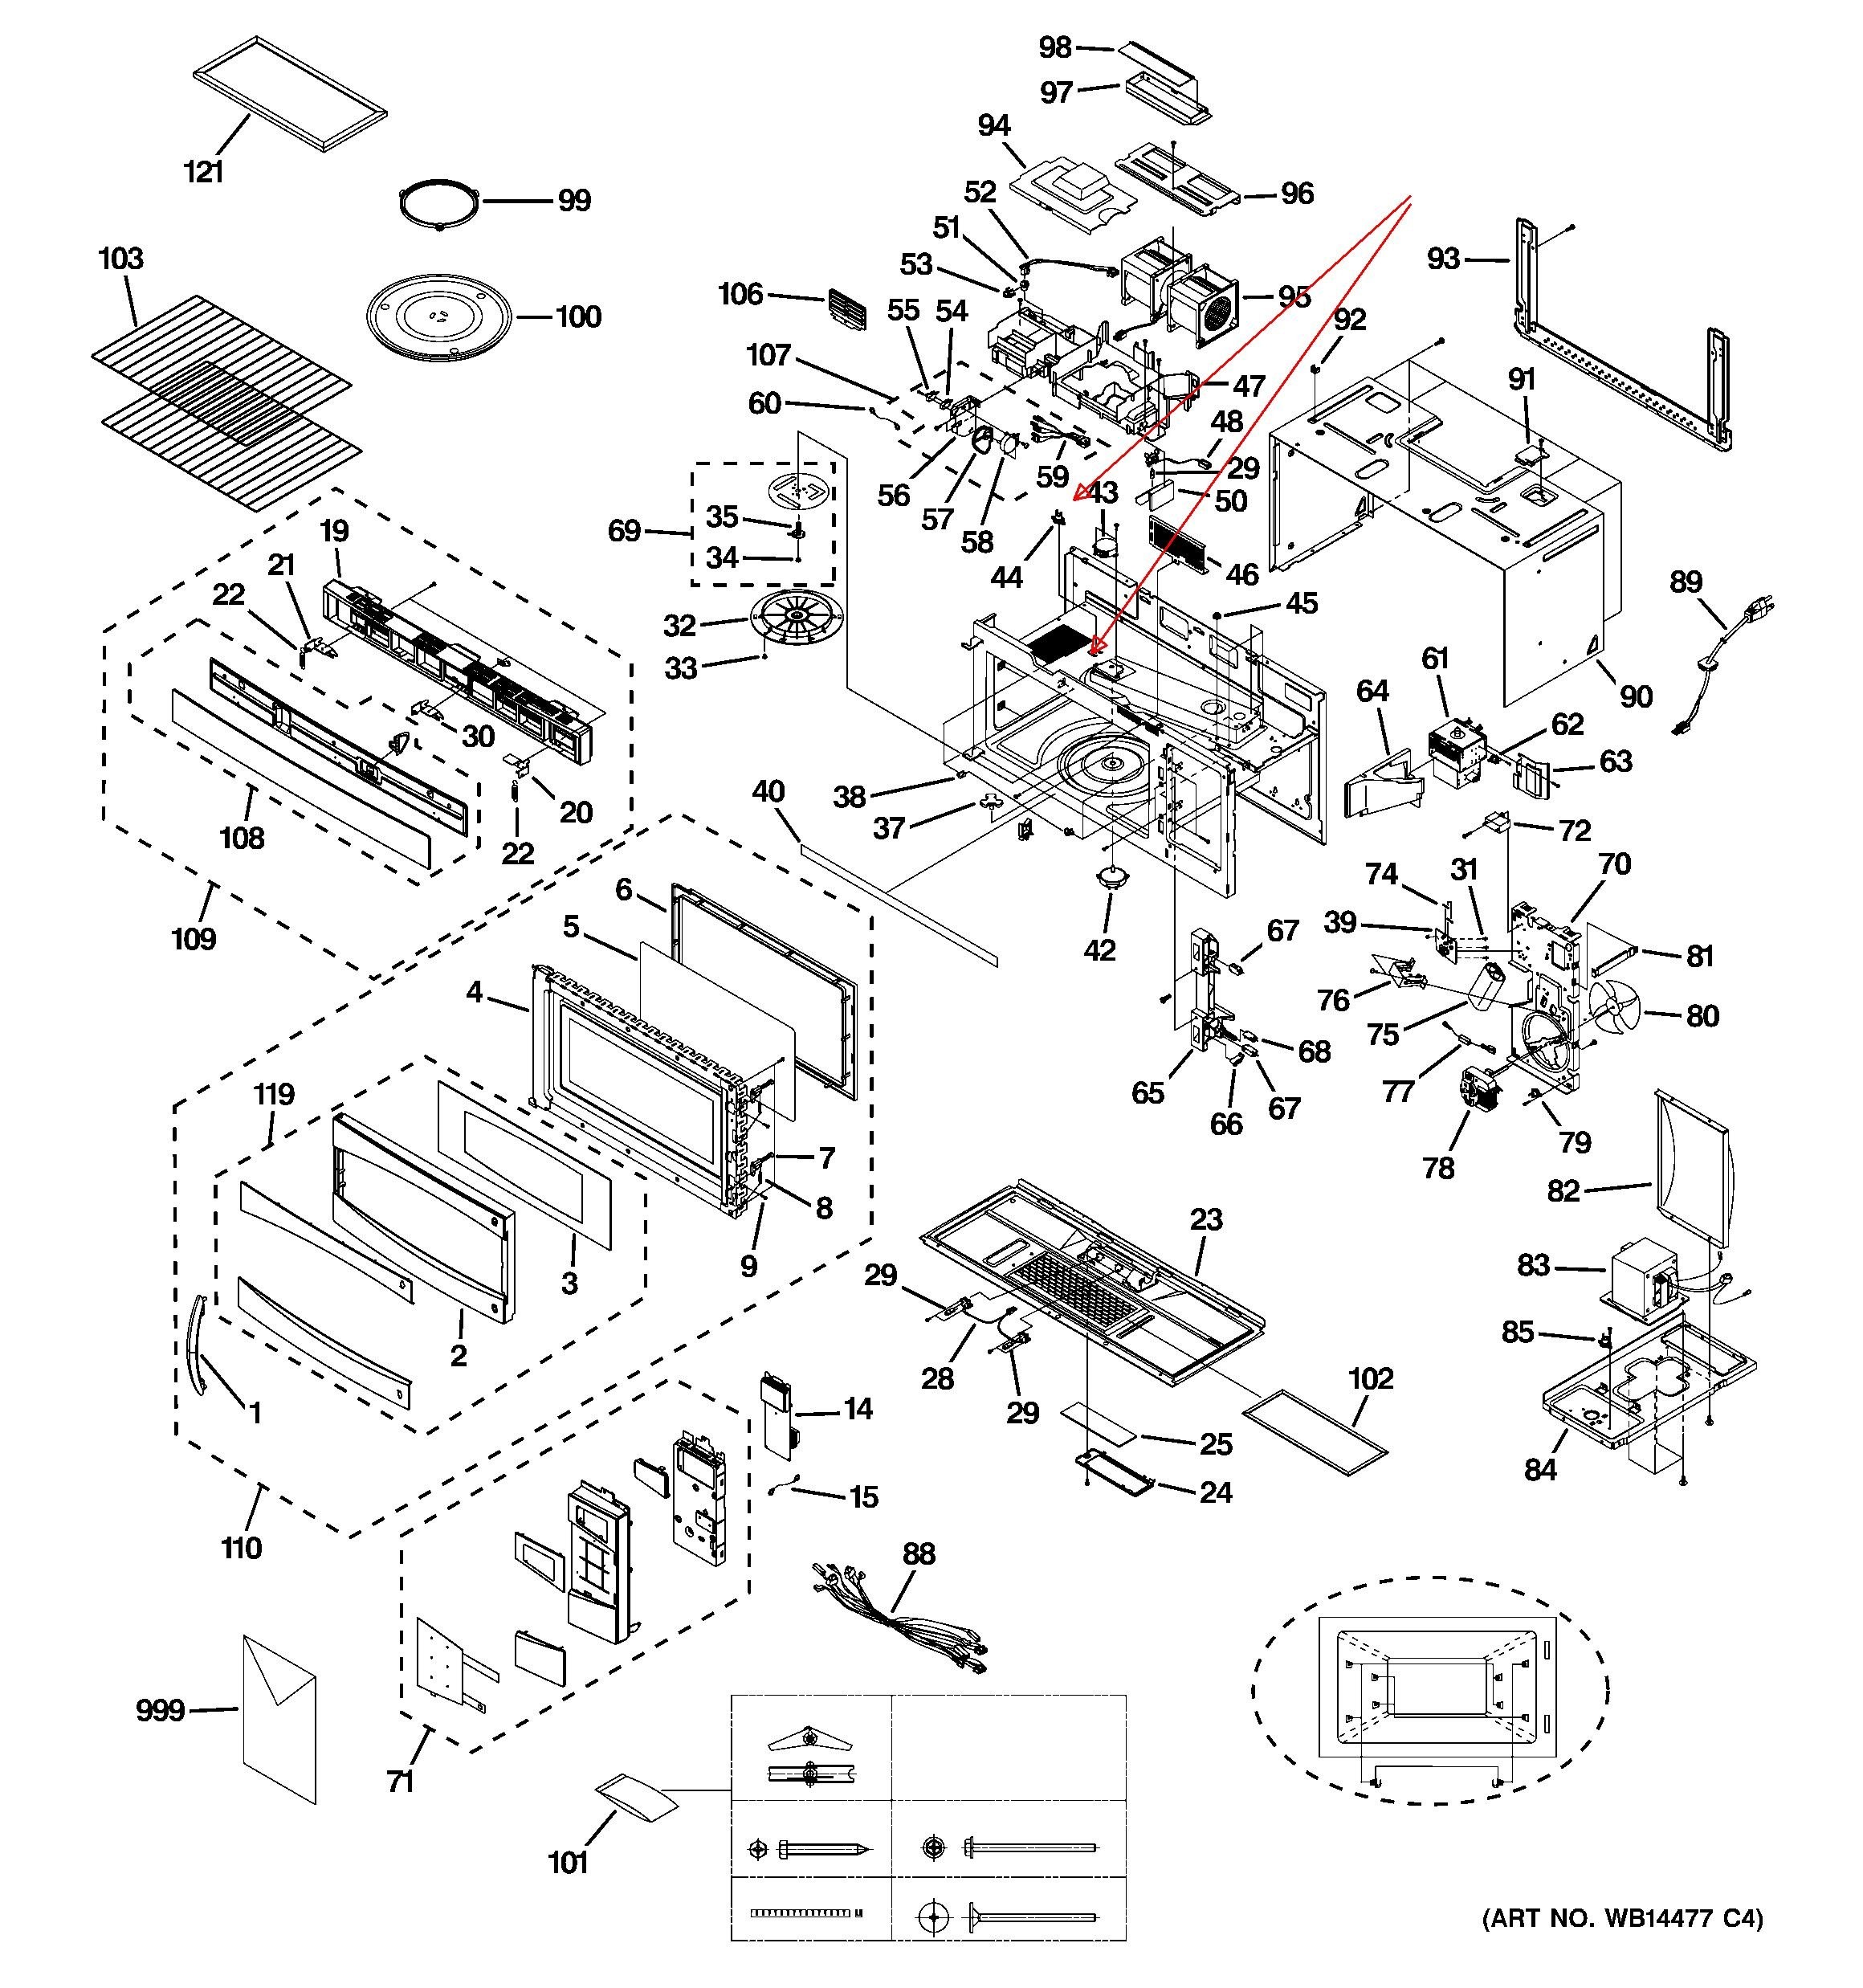 Ge Je1590bh Microwave Wiring Diagram I Have A Ge Microwave Model Pnm1871sm3ss I Was Cooking something and It Over Heated and now It Of Ge Je1590bh Microwave Wiring Diagram